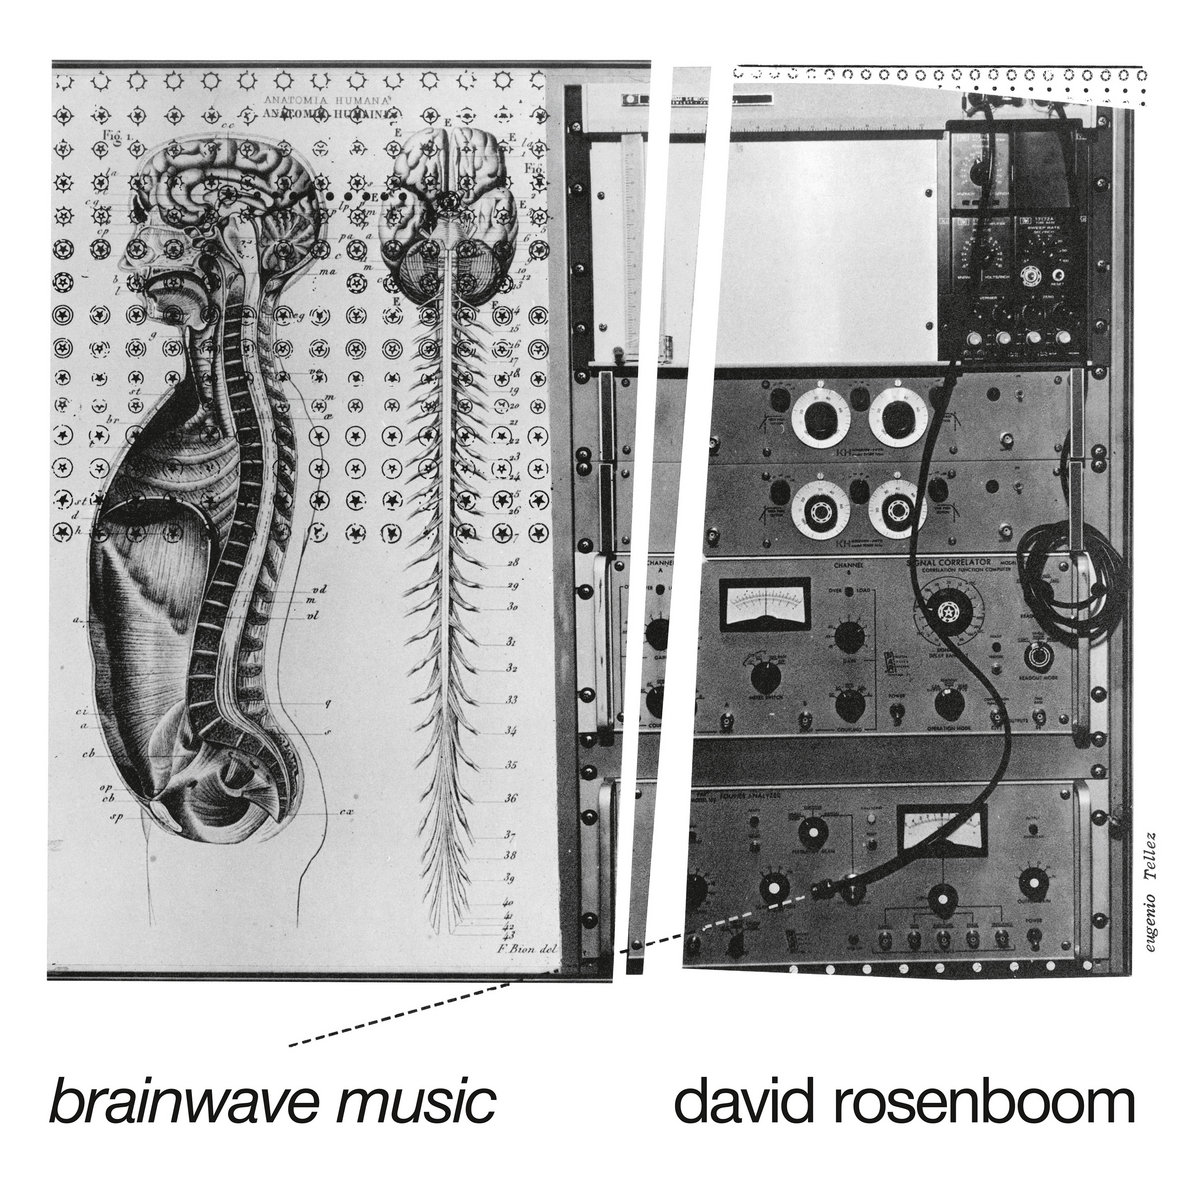 Cover artwork of David Rosenboom's *Brainwave Music*. This release is a collection of Roseboom's compositions with EEG and other biofeedback hardware. Image courtesy of Black Truffle record label.